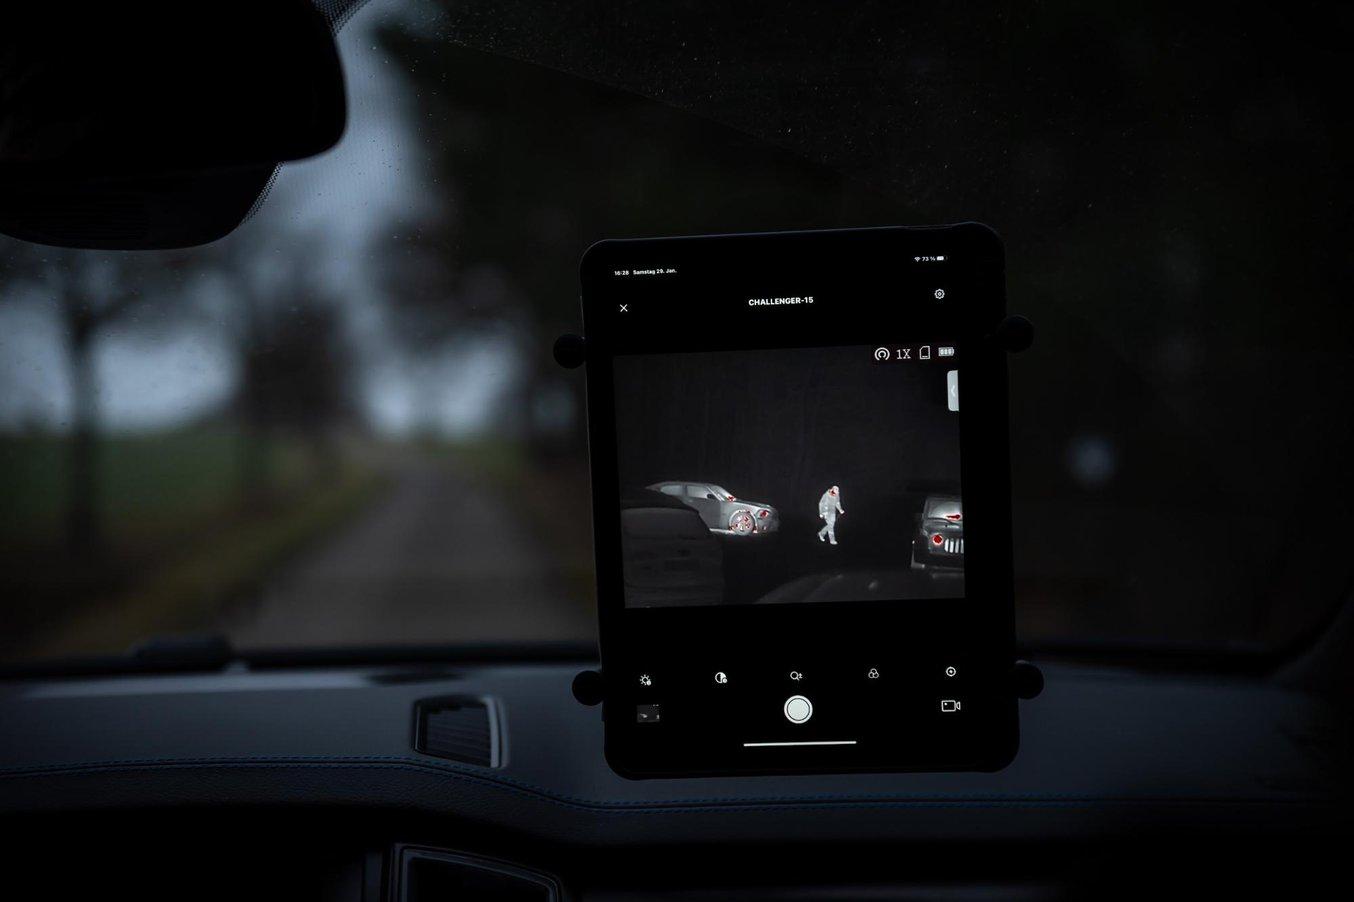 The thermal image on a tablet screen inside the car.